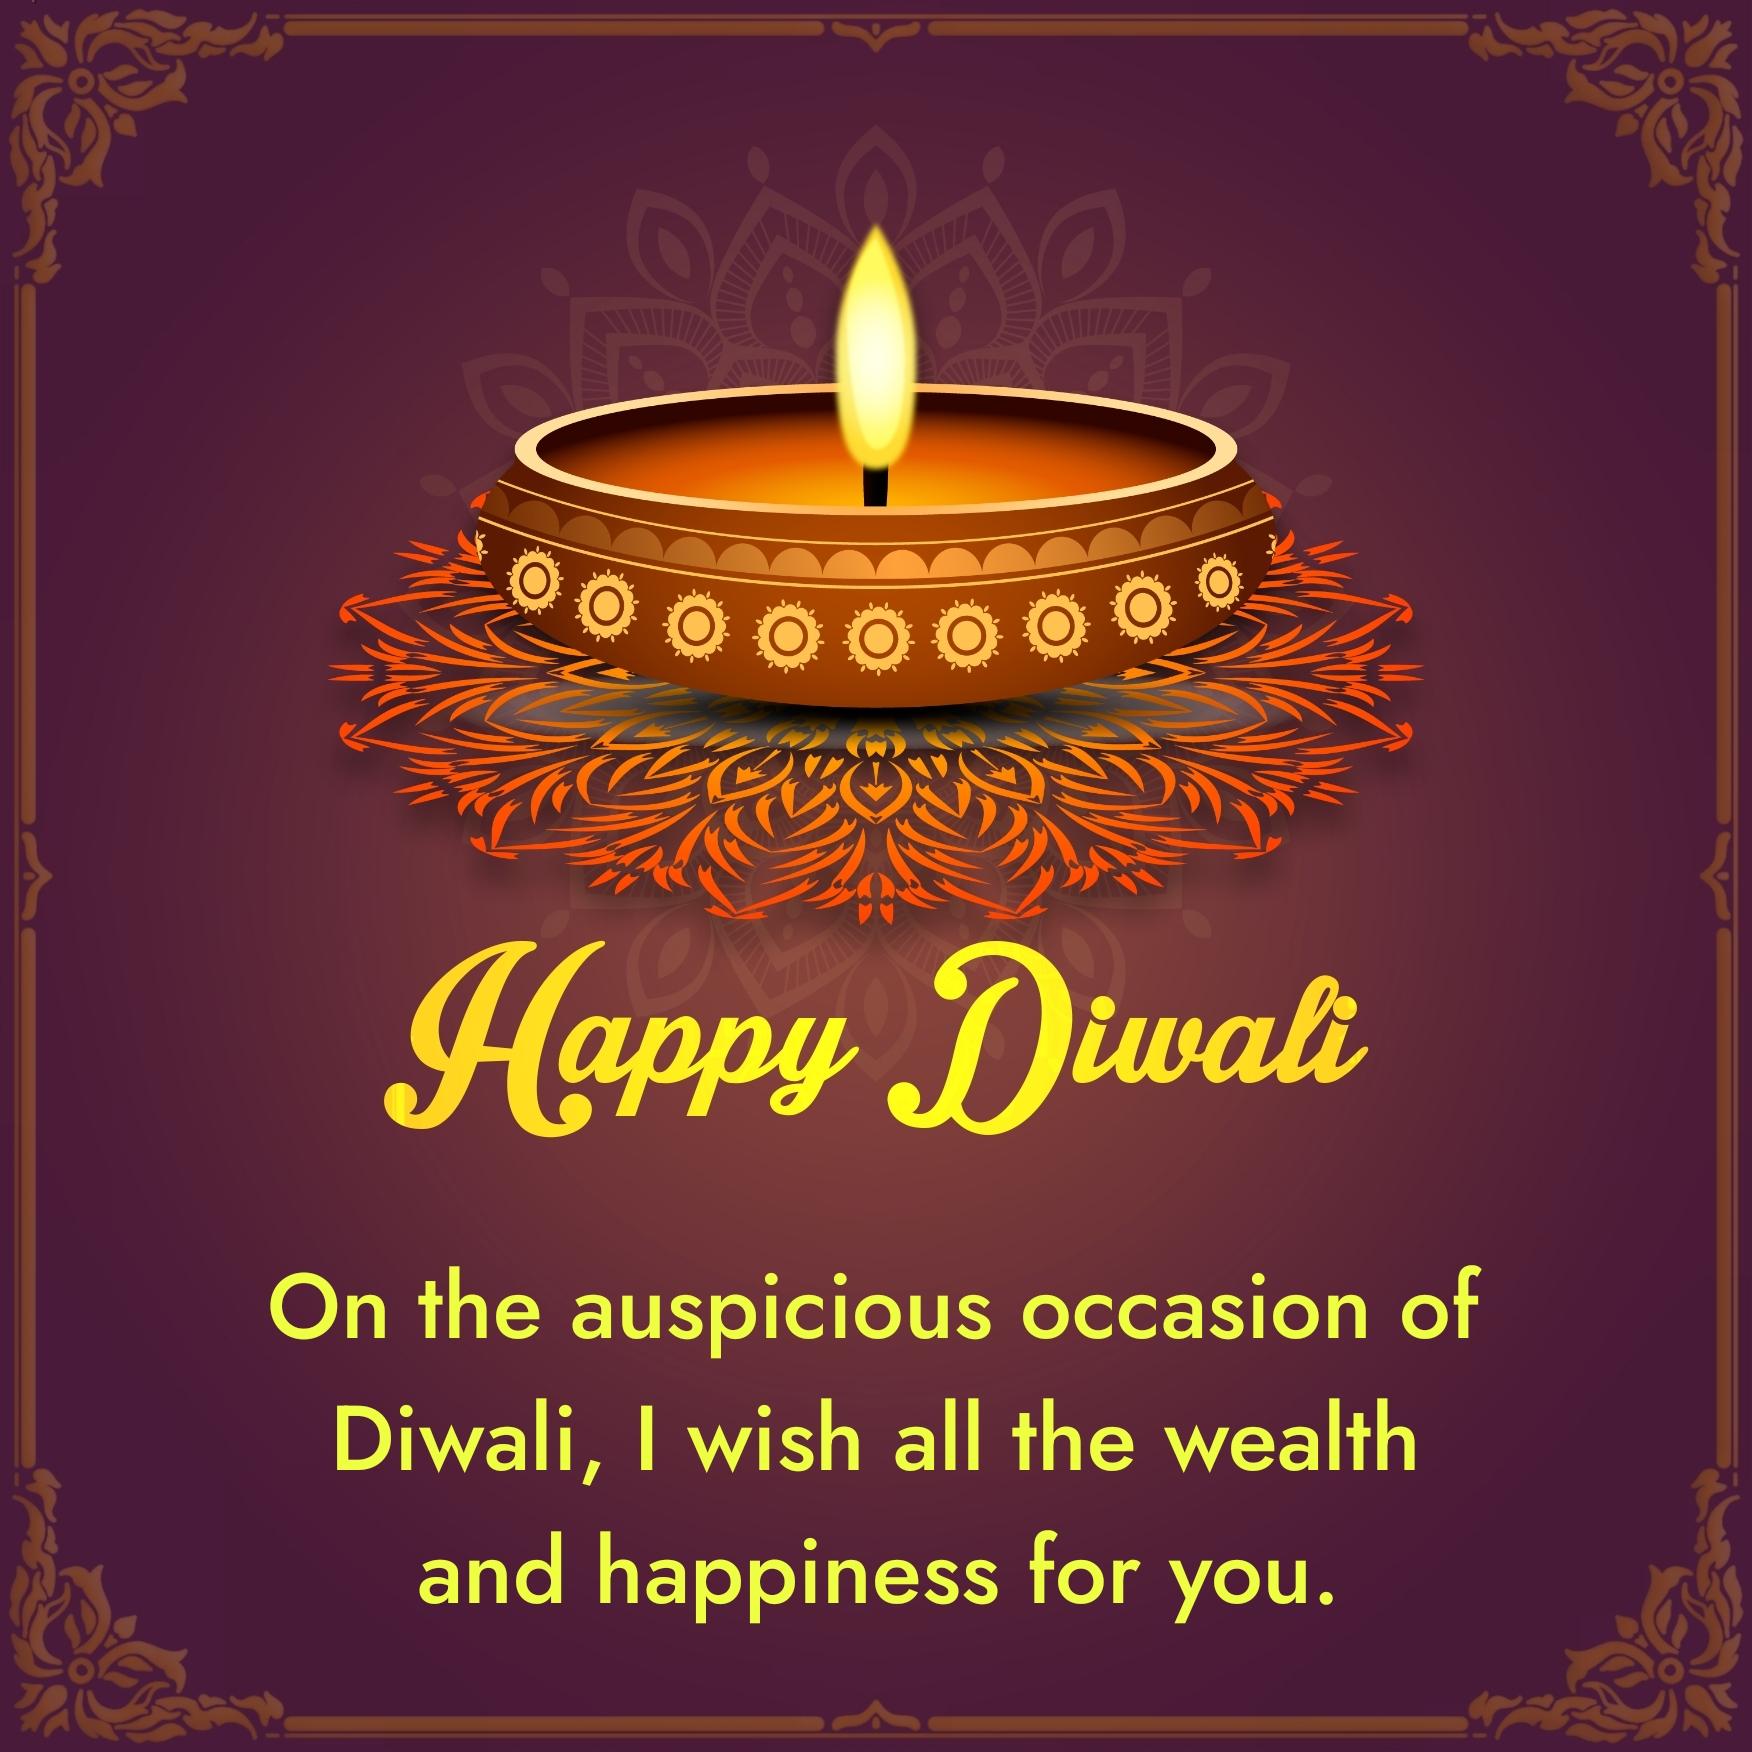 On the auspicious occasion of Diwali I wish all the wealth